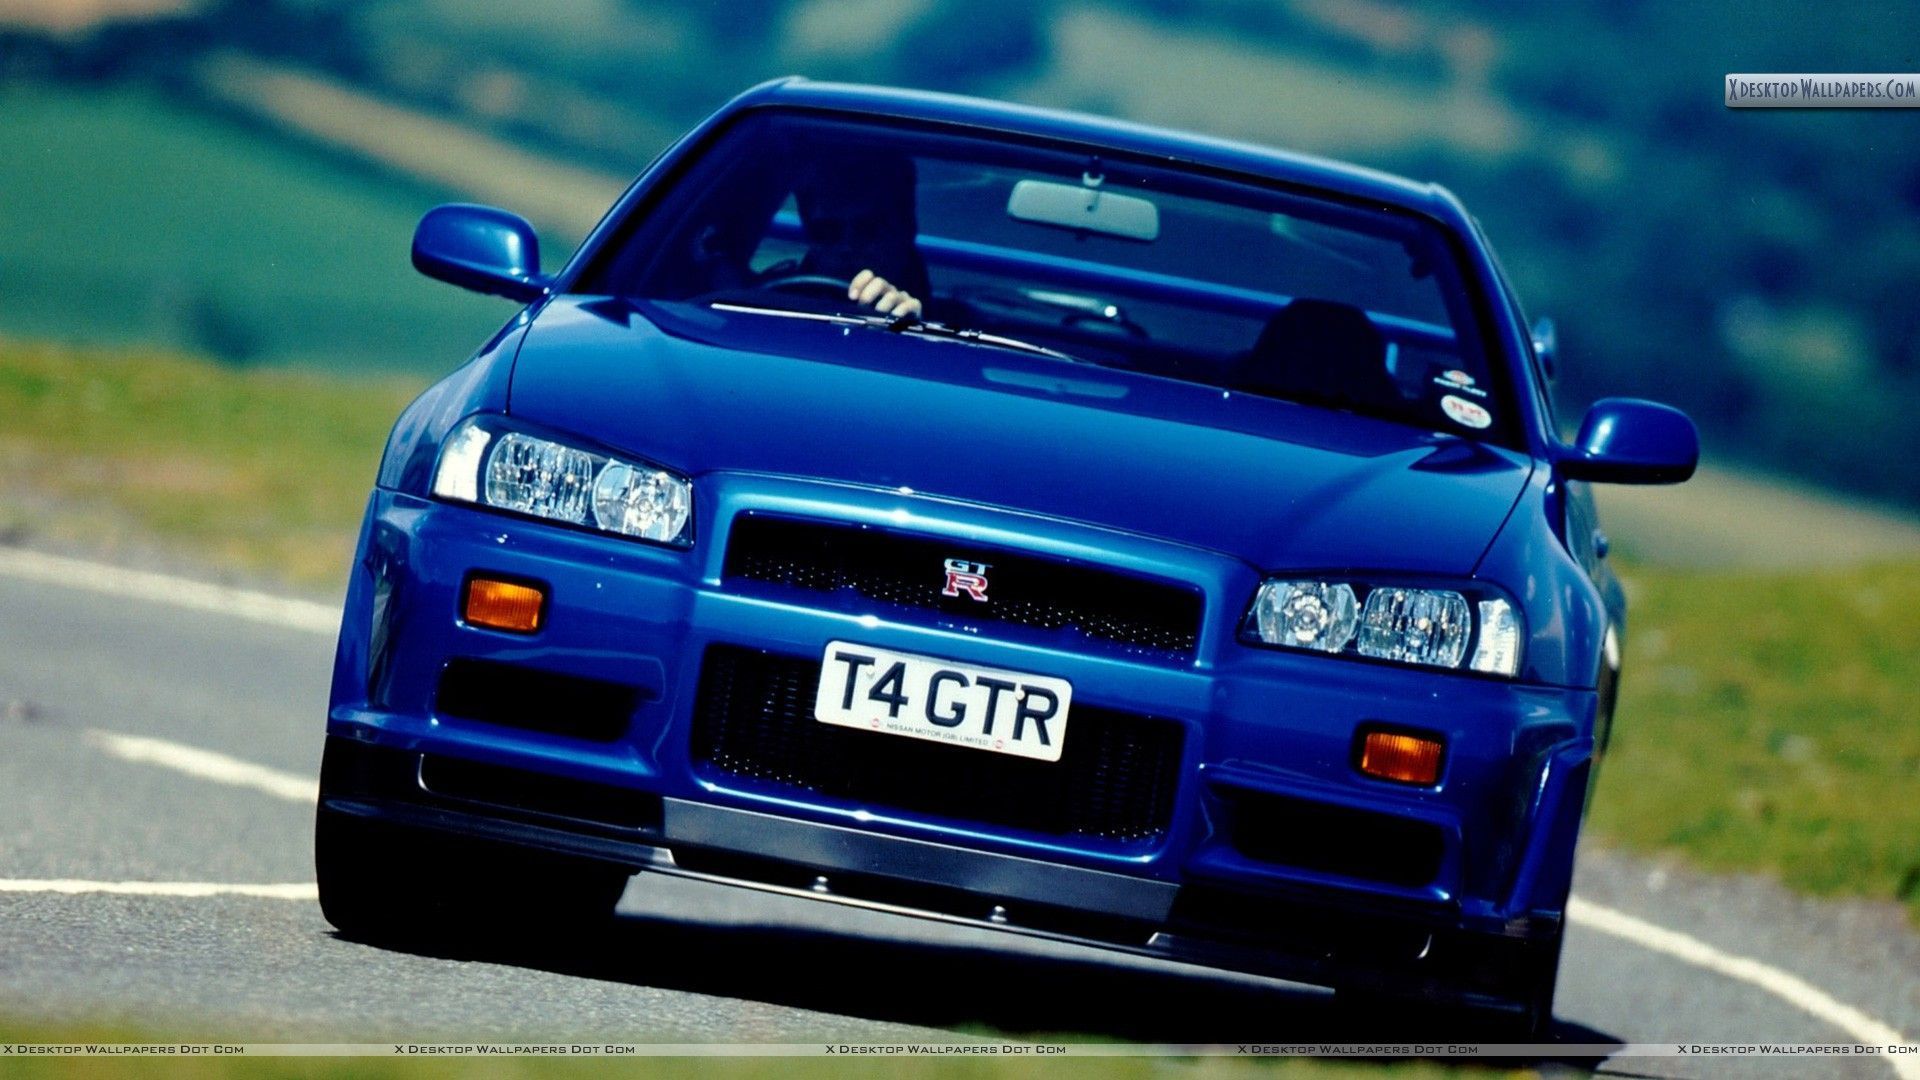 Nissan Skyline GT-R Wallpapers, Photos & Images in HD